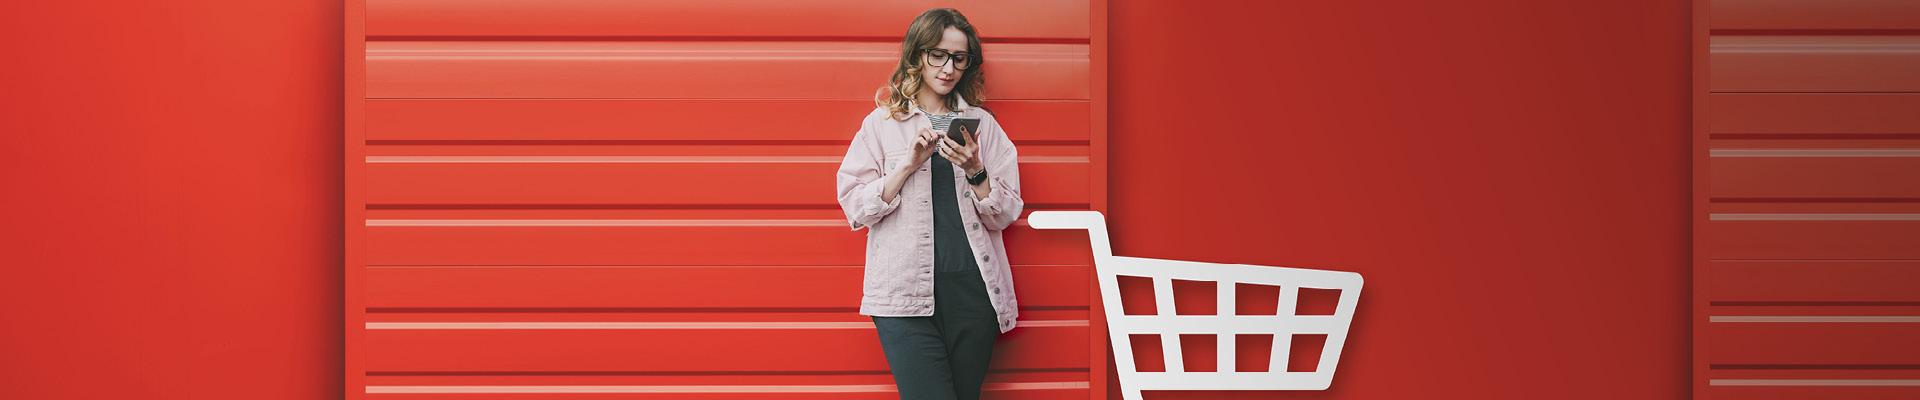 Woman leaning against garage door looking at mobile